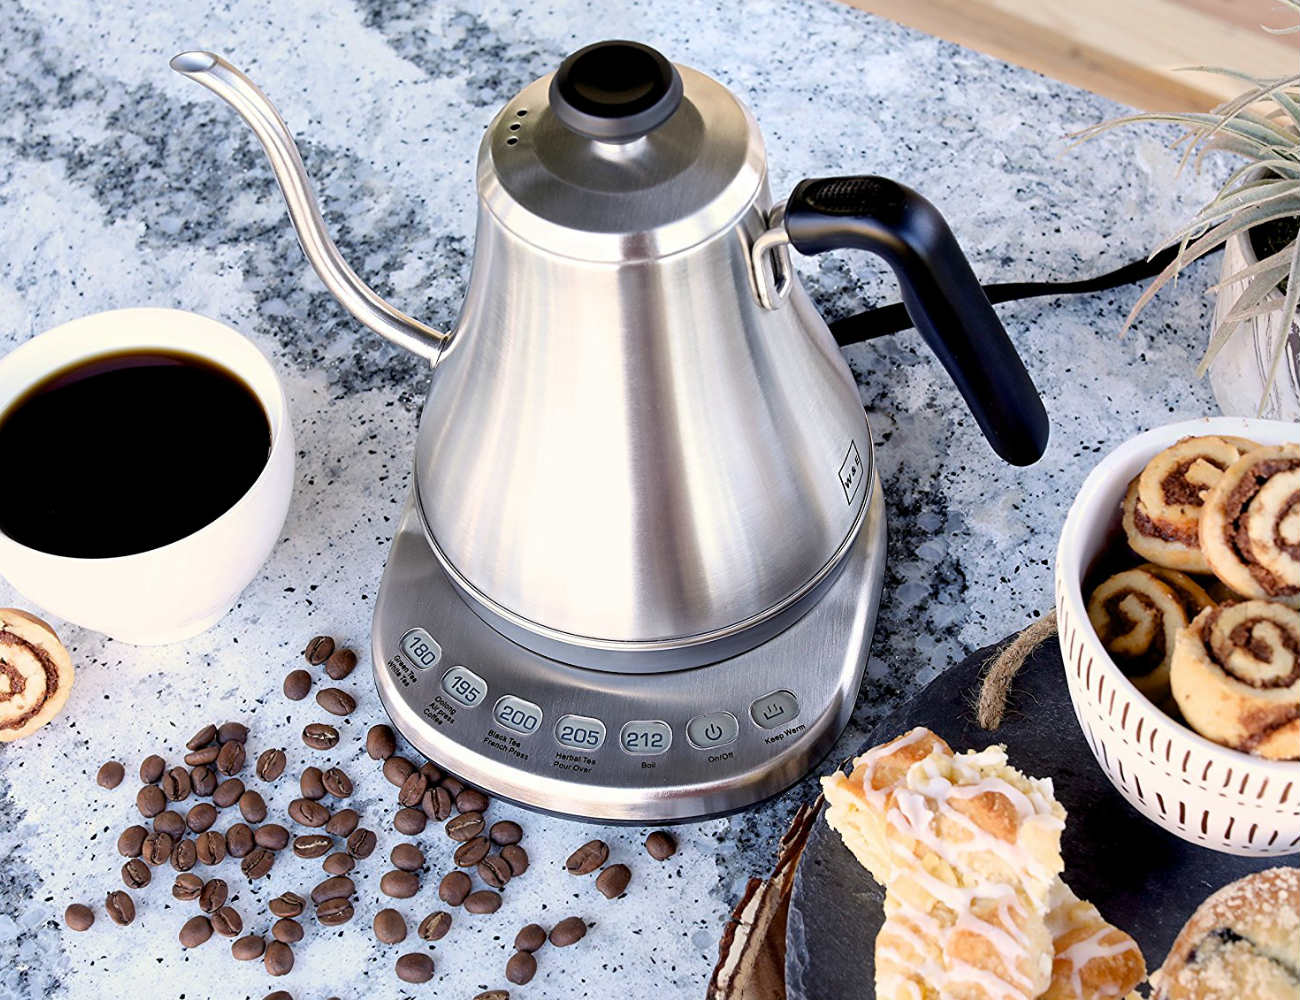 Best coffee gadgets for your winter mornings » Gadget Flow